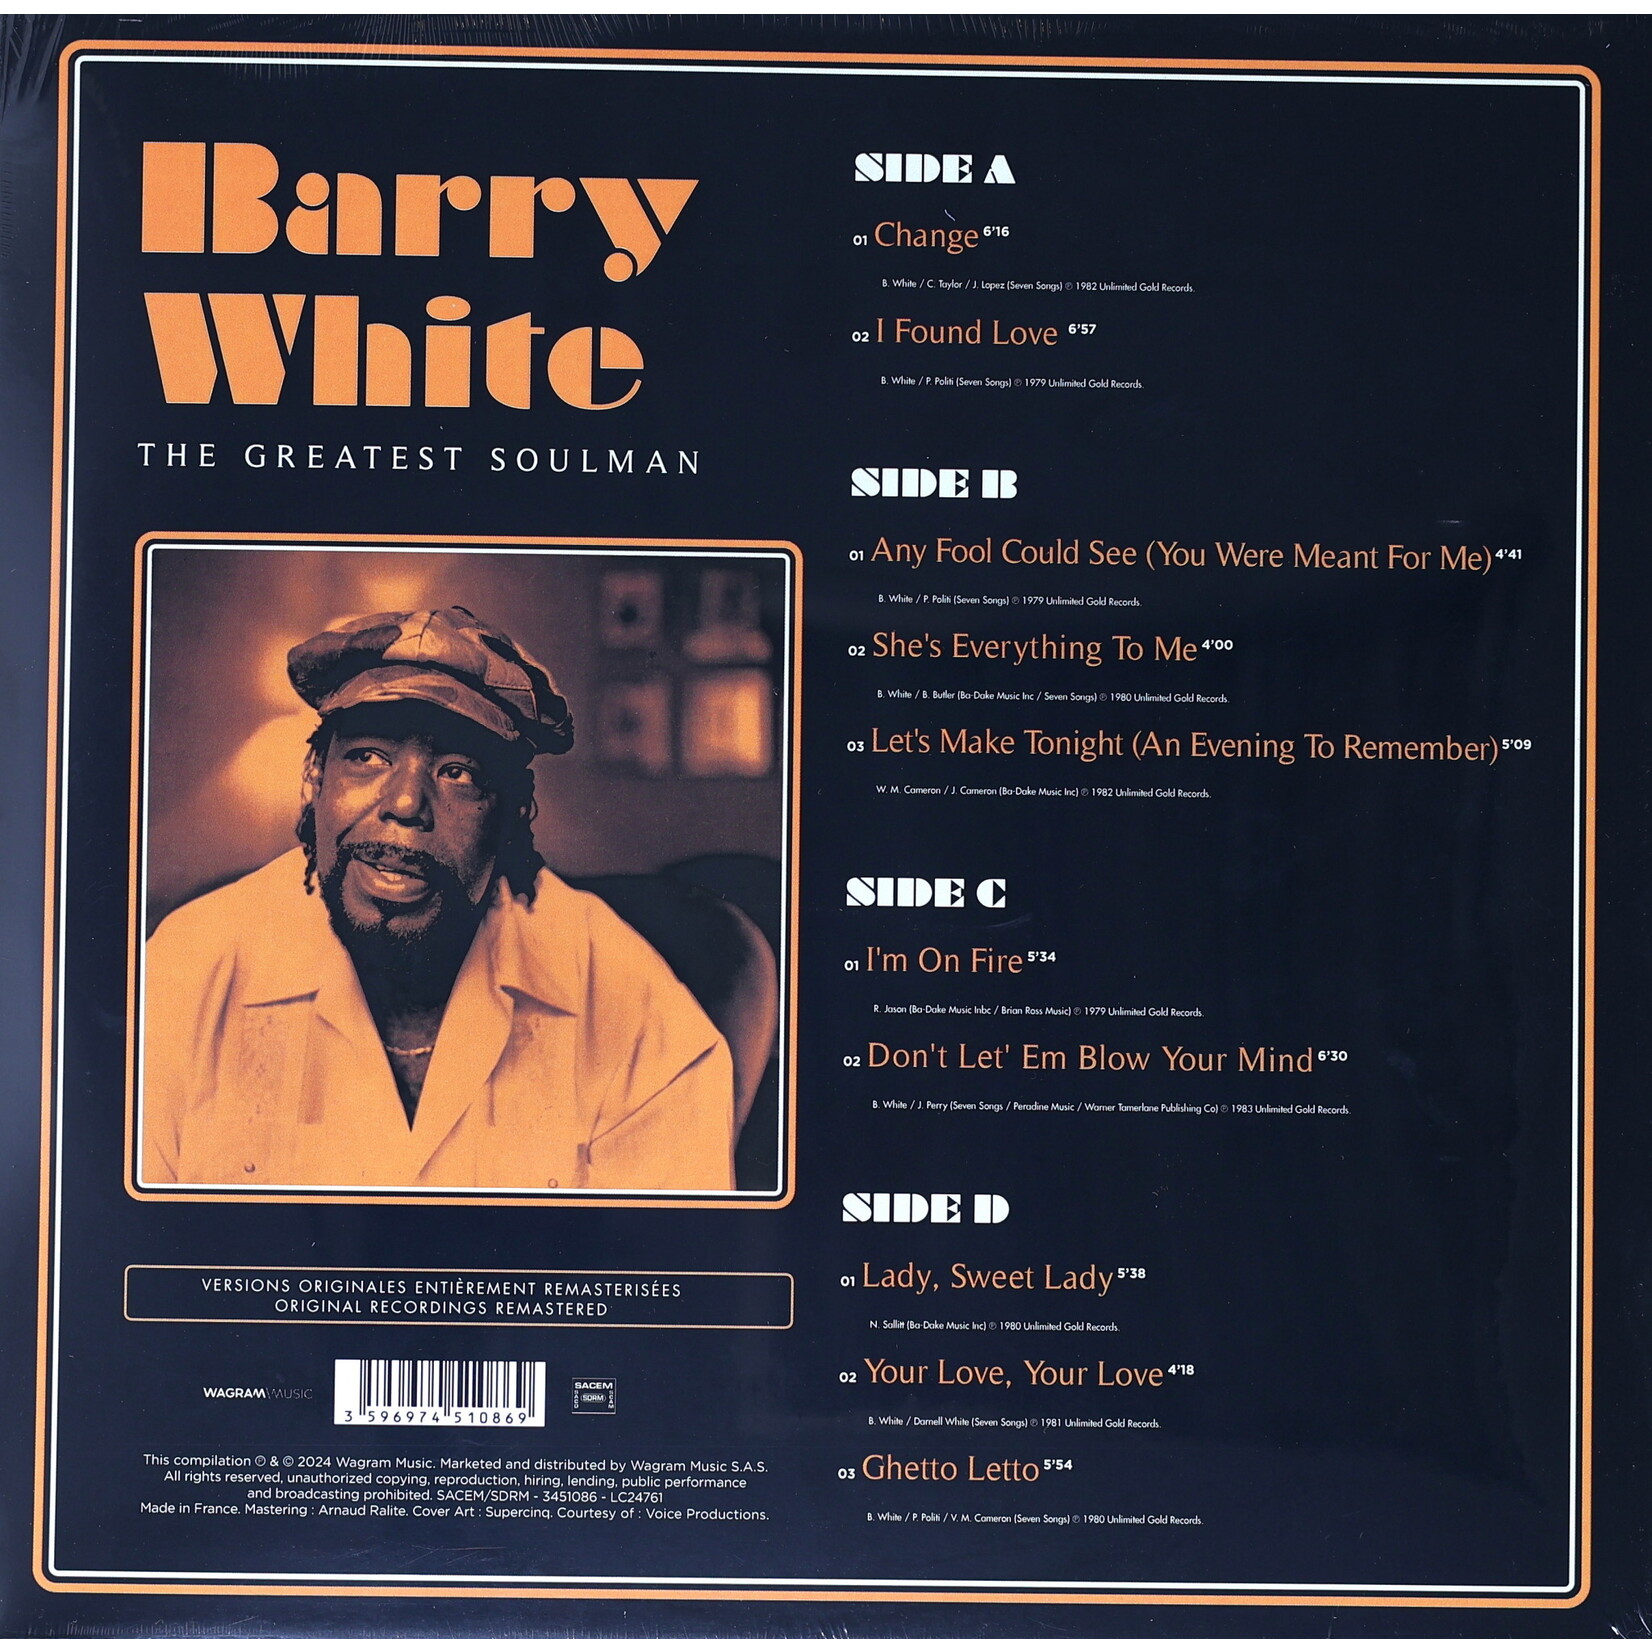 WHITE, BARRY - THE GREATEST SOULMAN - 2LP